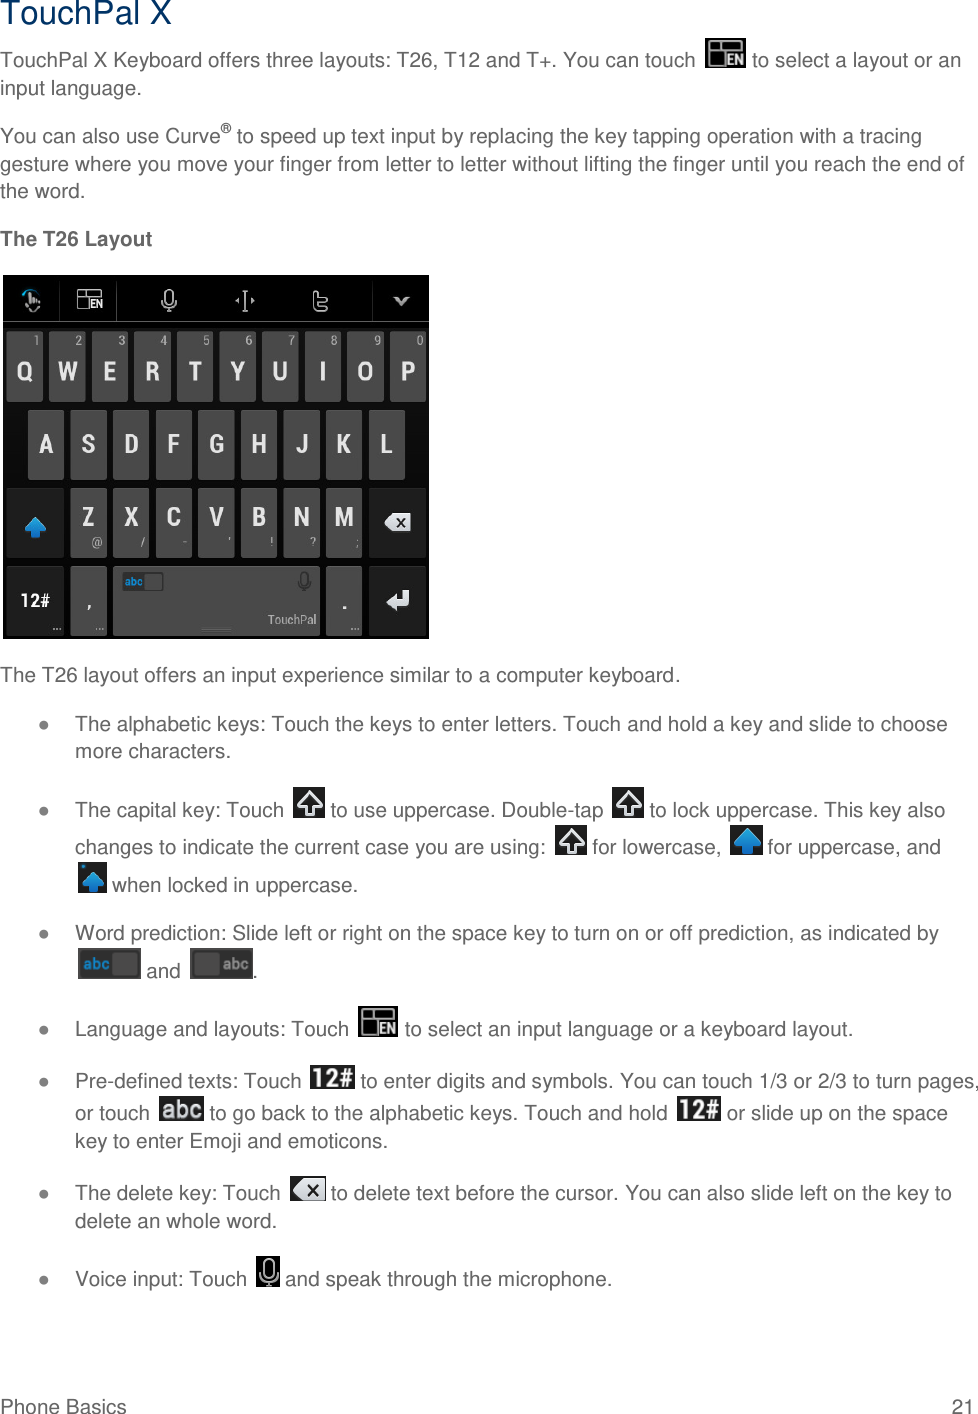 Phone Basics  21 TouchPal X TouchPal X Keyboard offers three layouts: T26, T12 and T+. You can touch   to select a layout or an input language. You can also use Curve® to speed up text input by replacing the key tapping operation with a tracing gesture where you move your finger from letter to letter without lifting the finger until you reach the end of the word. The T26 Layout  The T26 layout offers an input experience similar to a computer keyboard. ● The alphabetic keys: Touch the keys to enter letters. Touch and hold a key and slide to choose more characters. ● The capital key: Touch   to use uppercase. Double-tap   to lock uppercase. This key also changes to indicate the current case you are using:   for lowercase,   for uppercase, and  when locked in uppercase. ● Word prediction: Slide left or right on the space key to turn on or off prediction, as indicated by  and  . ● Language and layouts: Touch   to select an input language or a keyboard layout. ● Pre-defined texts: Touch   to enter digits and symbols. You can touch 1/3 or 2/3 to turn pages, or touch   to go back to the alphabetic keys. Touch and hold   or slide up on the space key to enter Emoji and emoticons. ● The delete key: Touch   to delete text before the cursor. You can also slide left on the key to delete an whole word. ● Voice input: Touch   and speak through the microphone. 